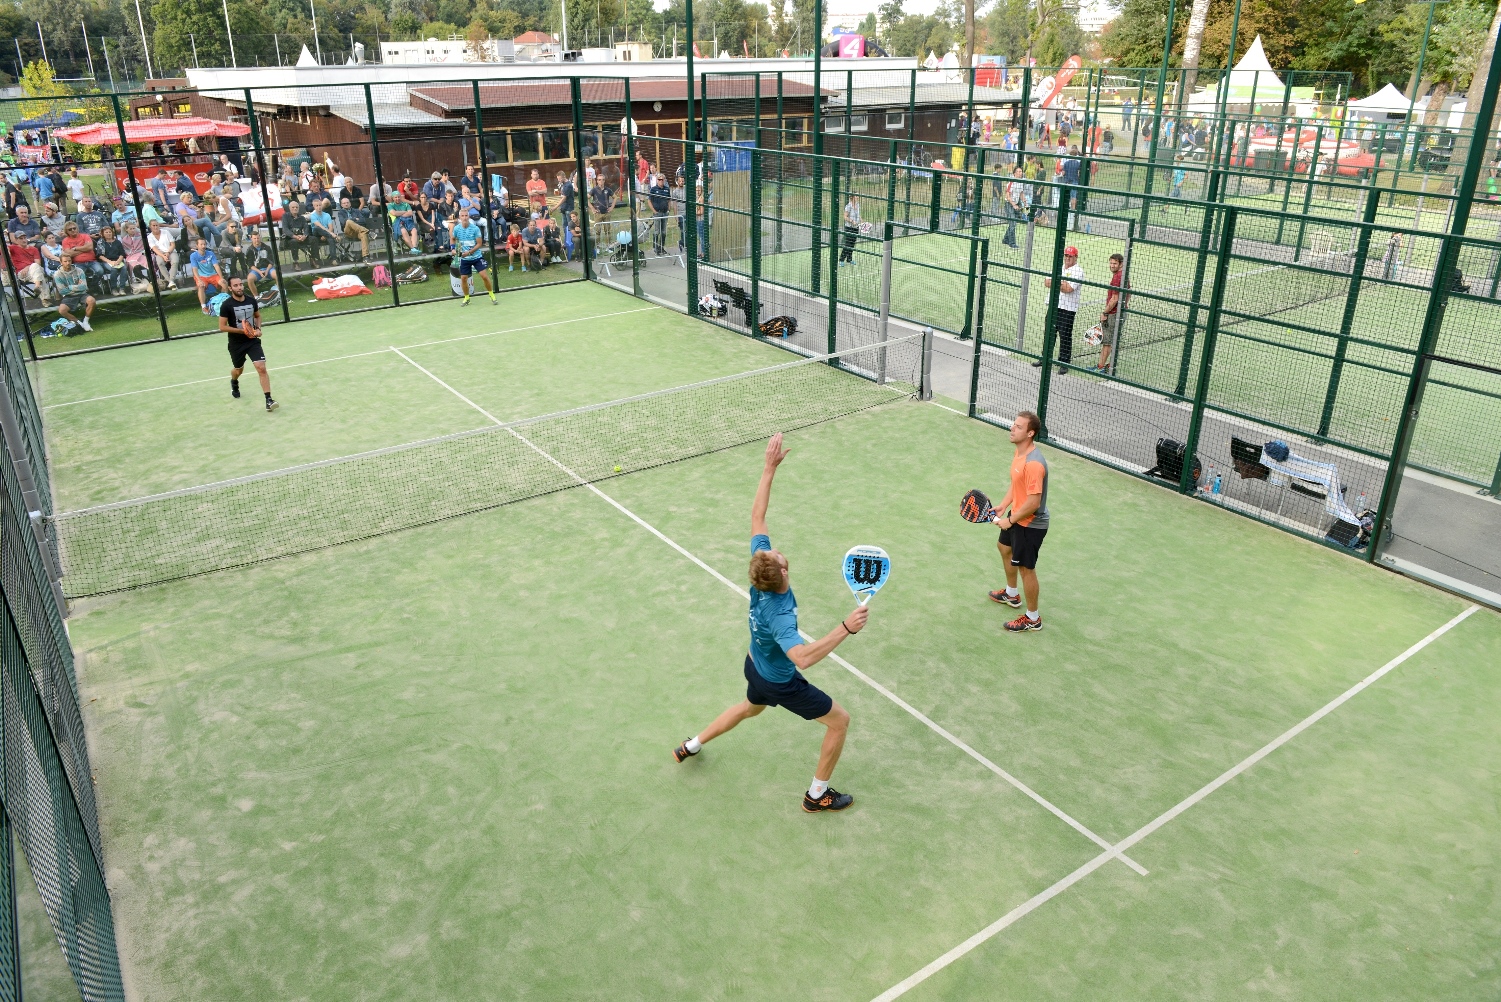 Le Padel, what are the risks of noise pollution? How to deal with the conflict?